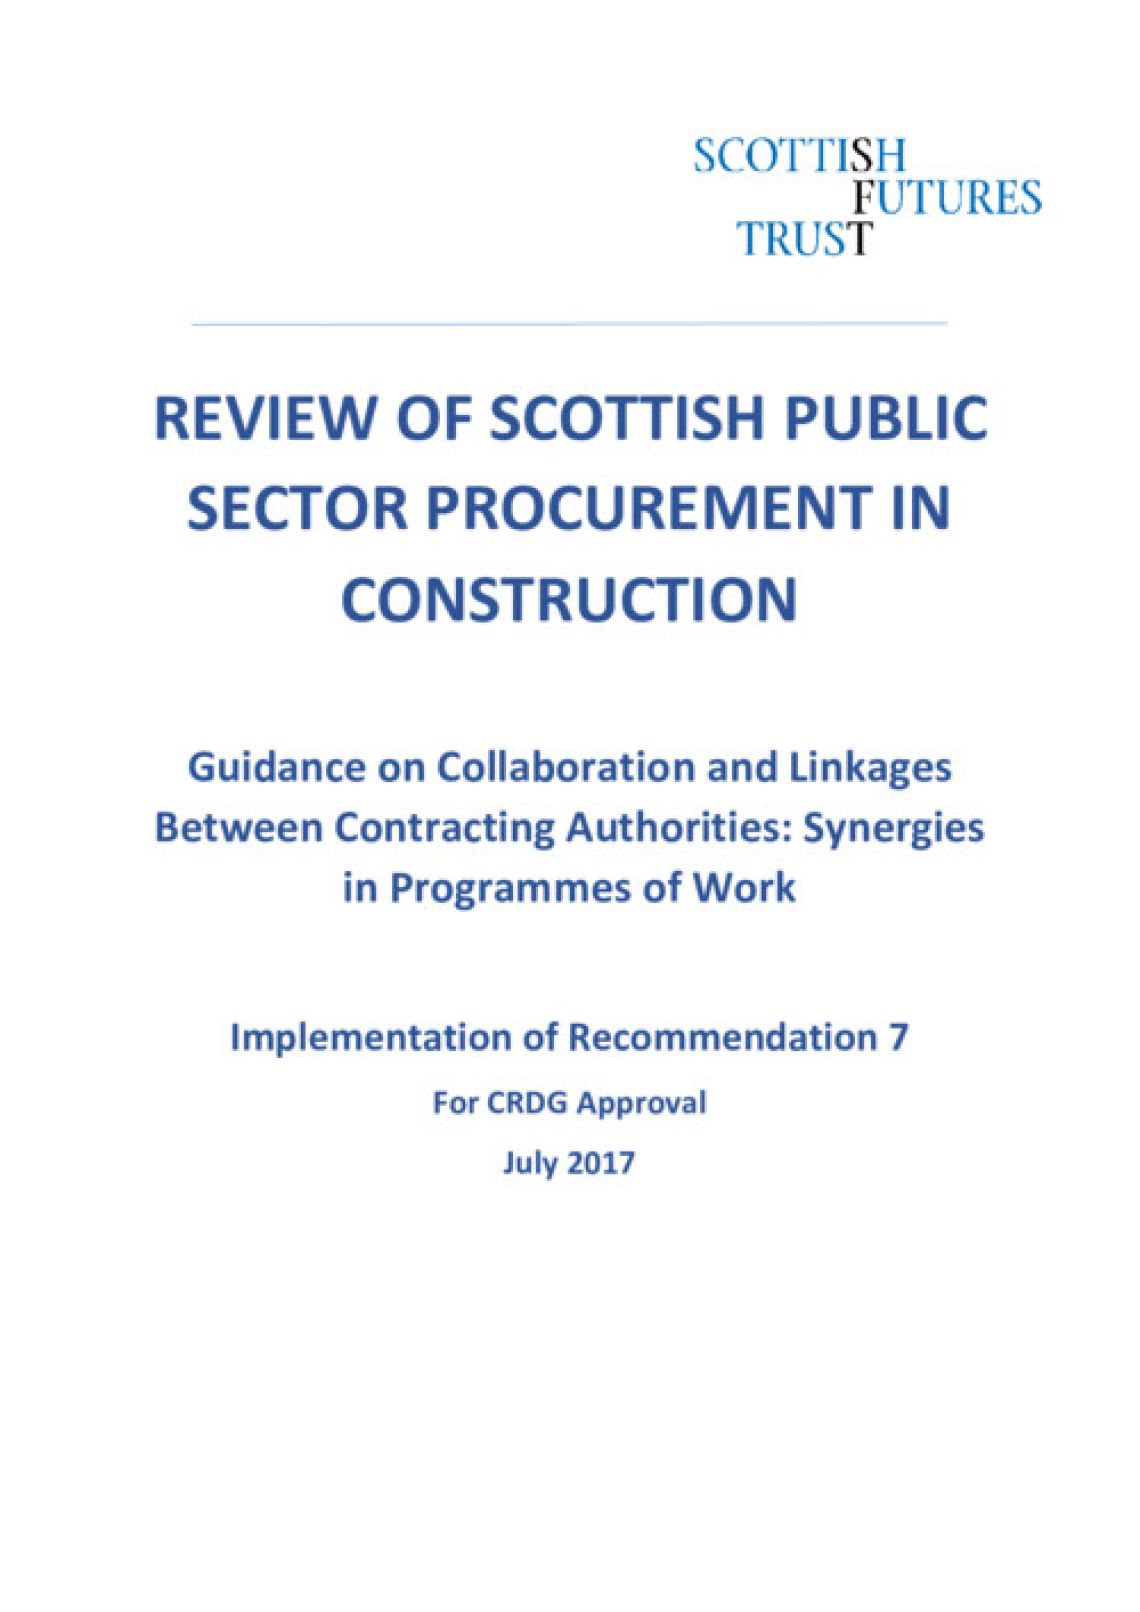 Guidance on linkages and collaboration between contracting authorities cover